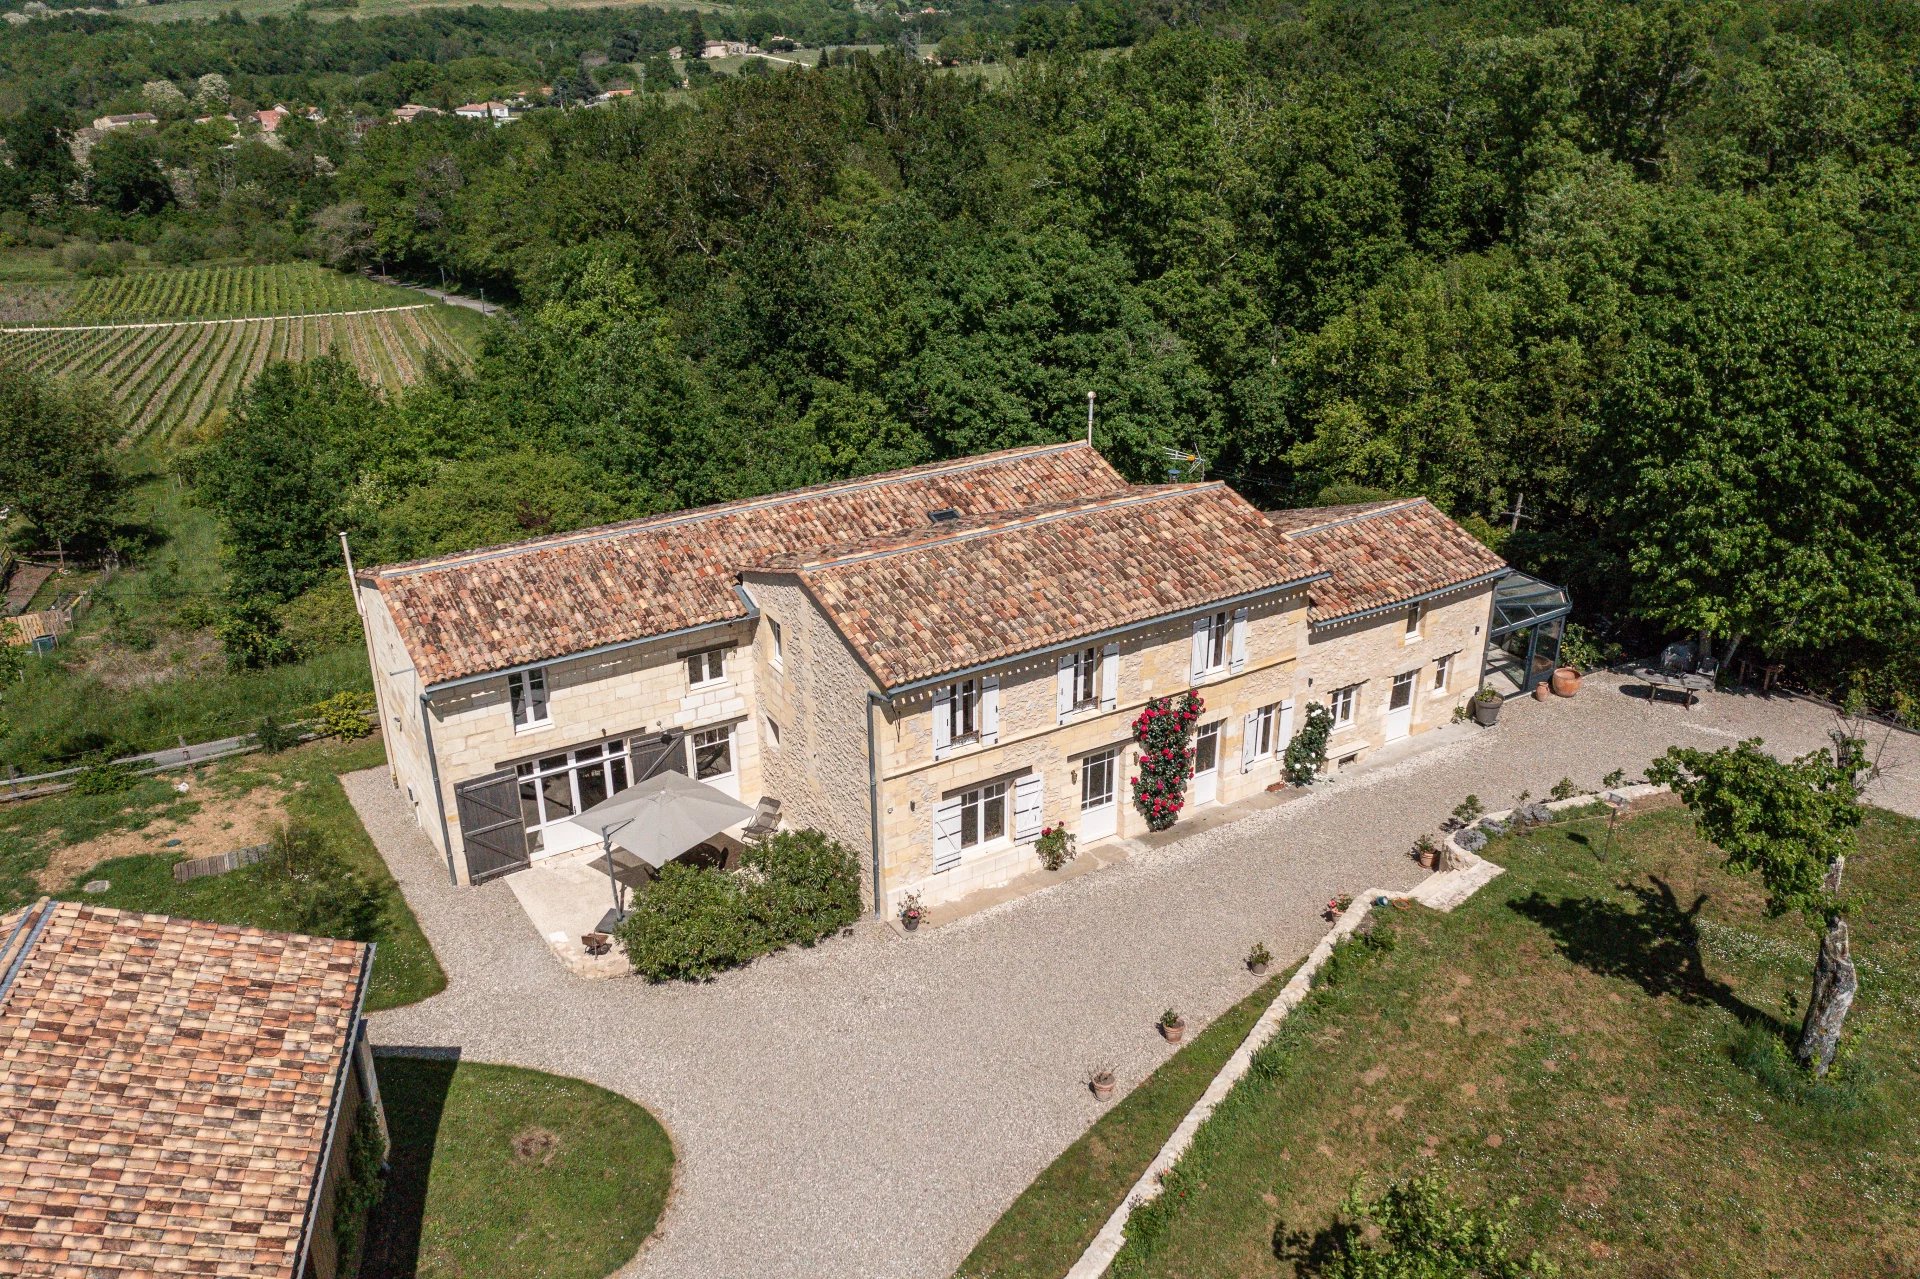 Stone house and 3 gîtes - a turnkey opportunity